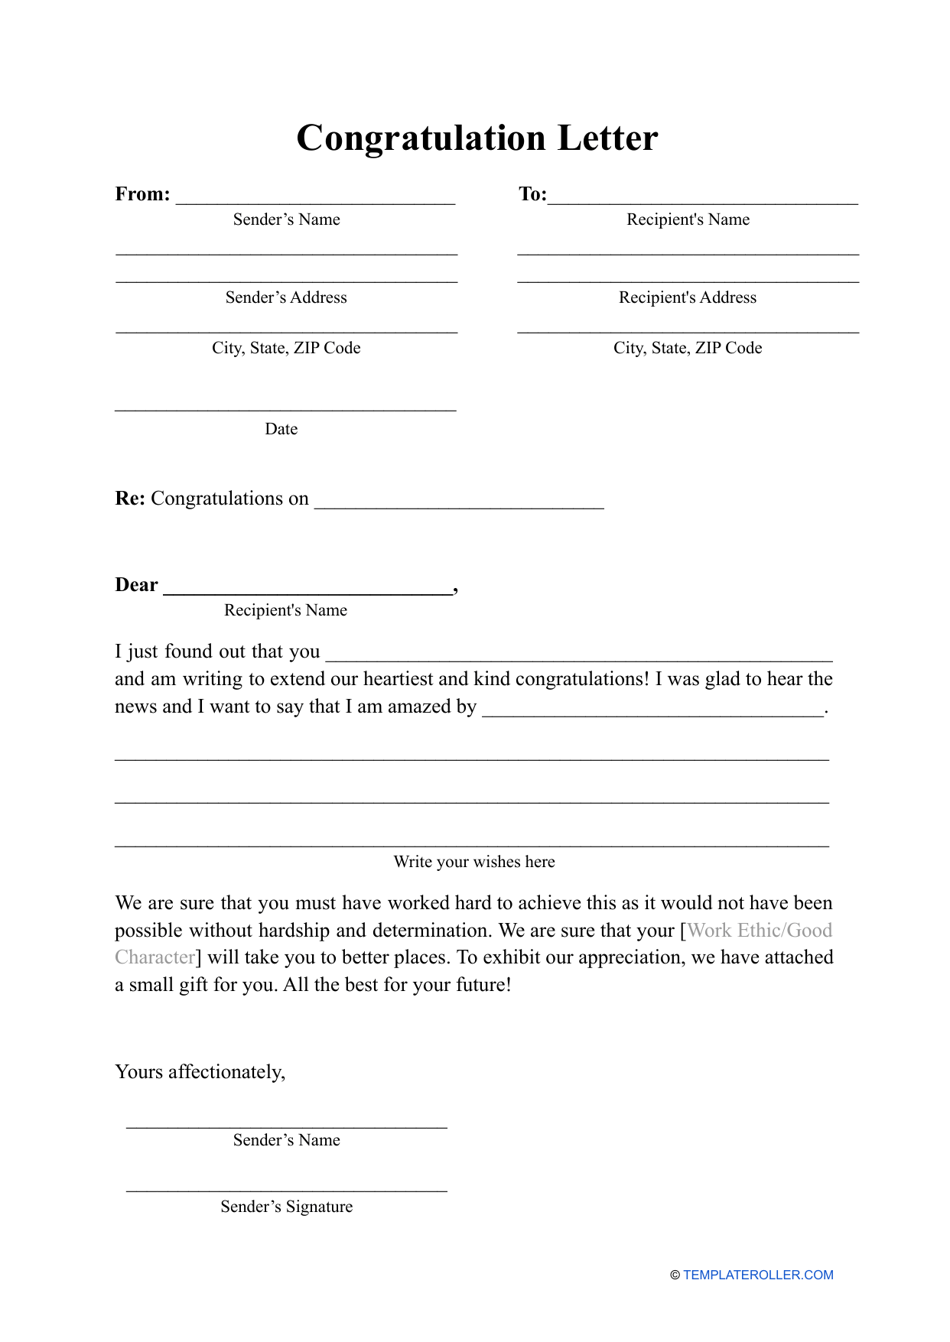 Congratulation Letter Template - Professional and customizable